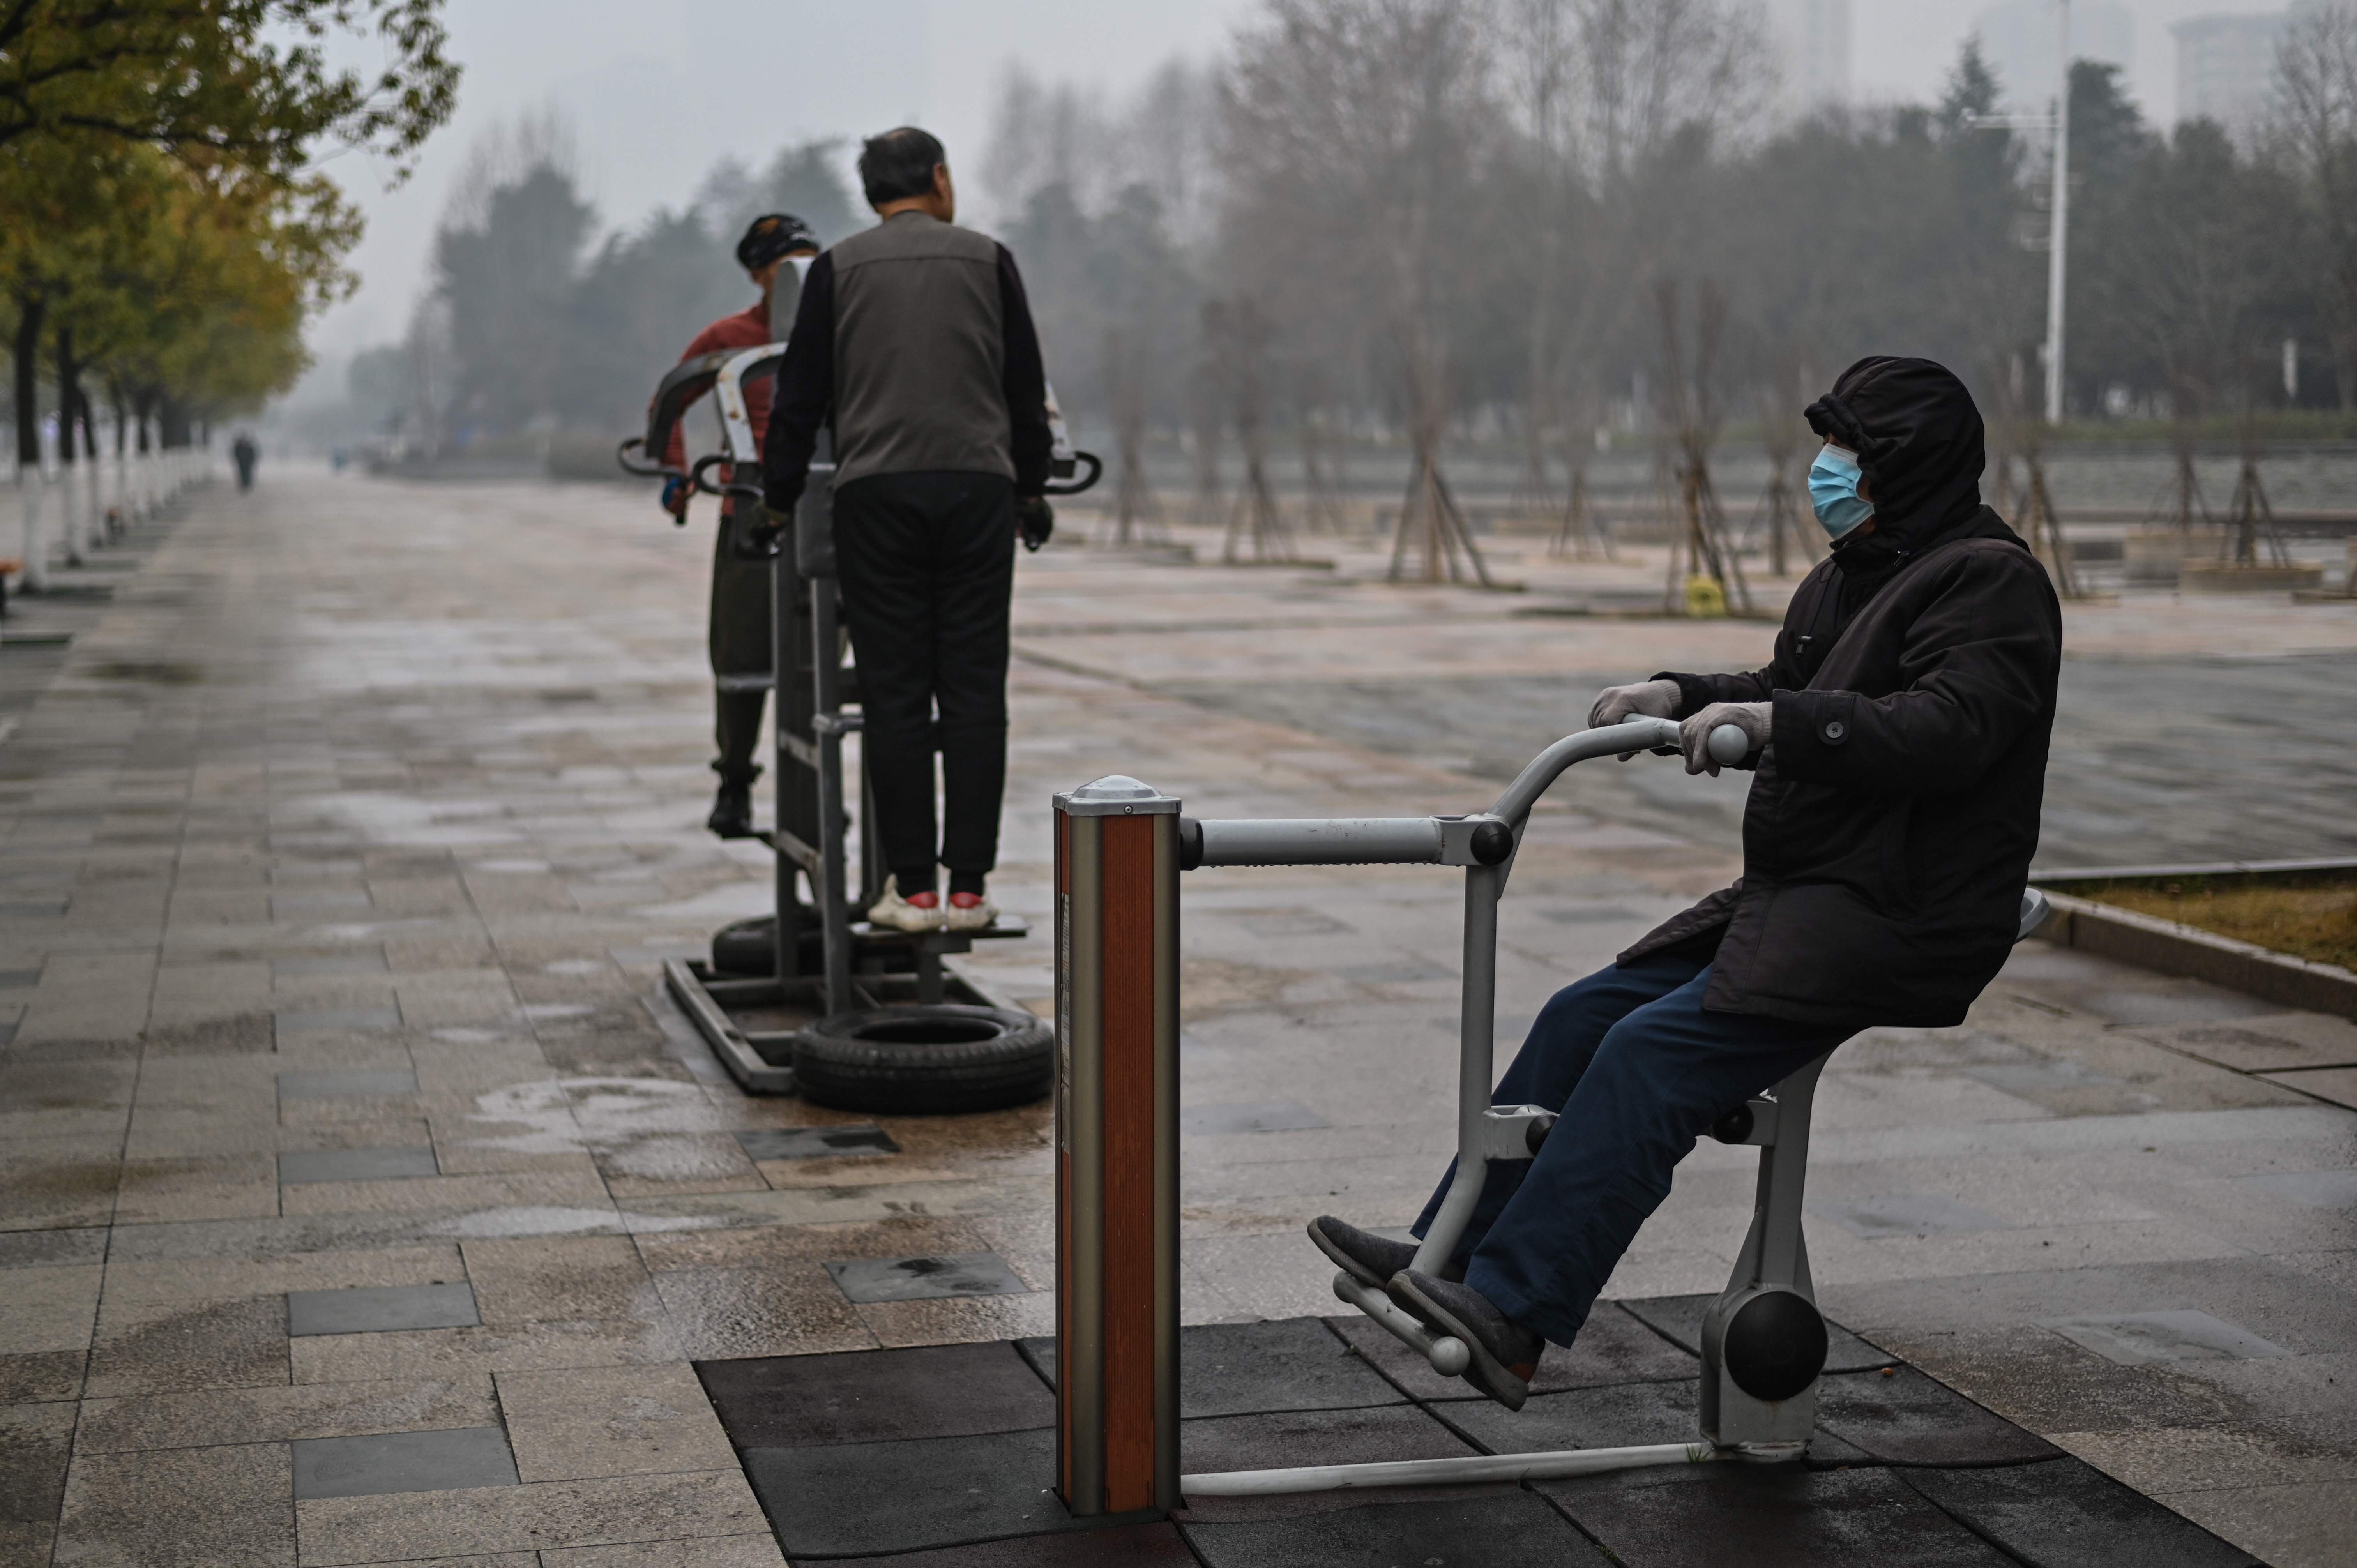 China’s new five-year plan sets a goal to increase life expectancy by one year by 2025. Photo: AFP